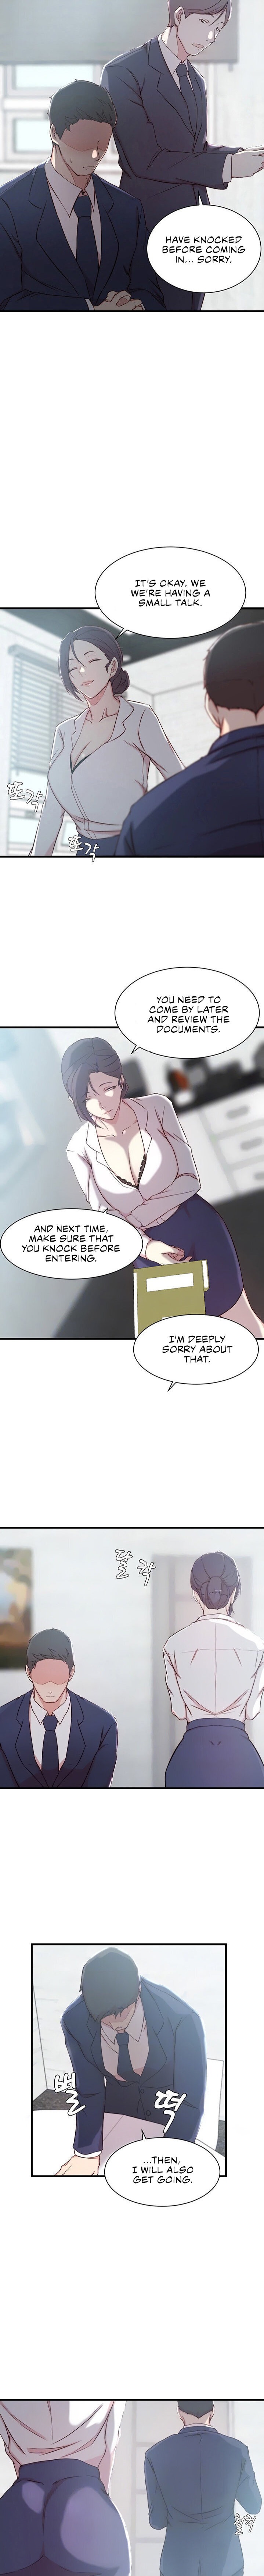 Sister-in-Law Manhwa - Chapter 12 Page 3